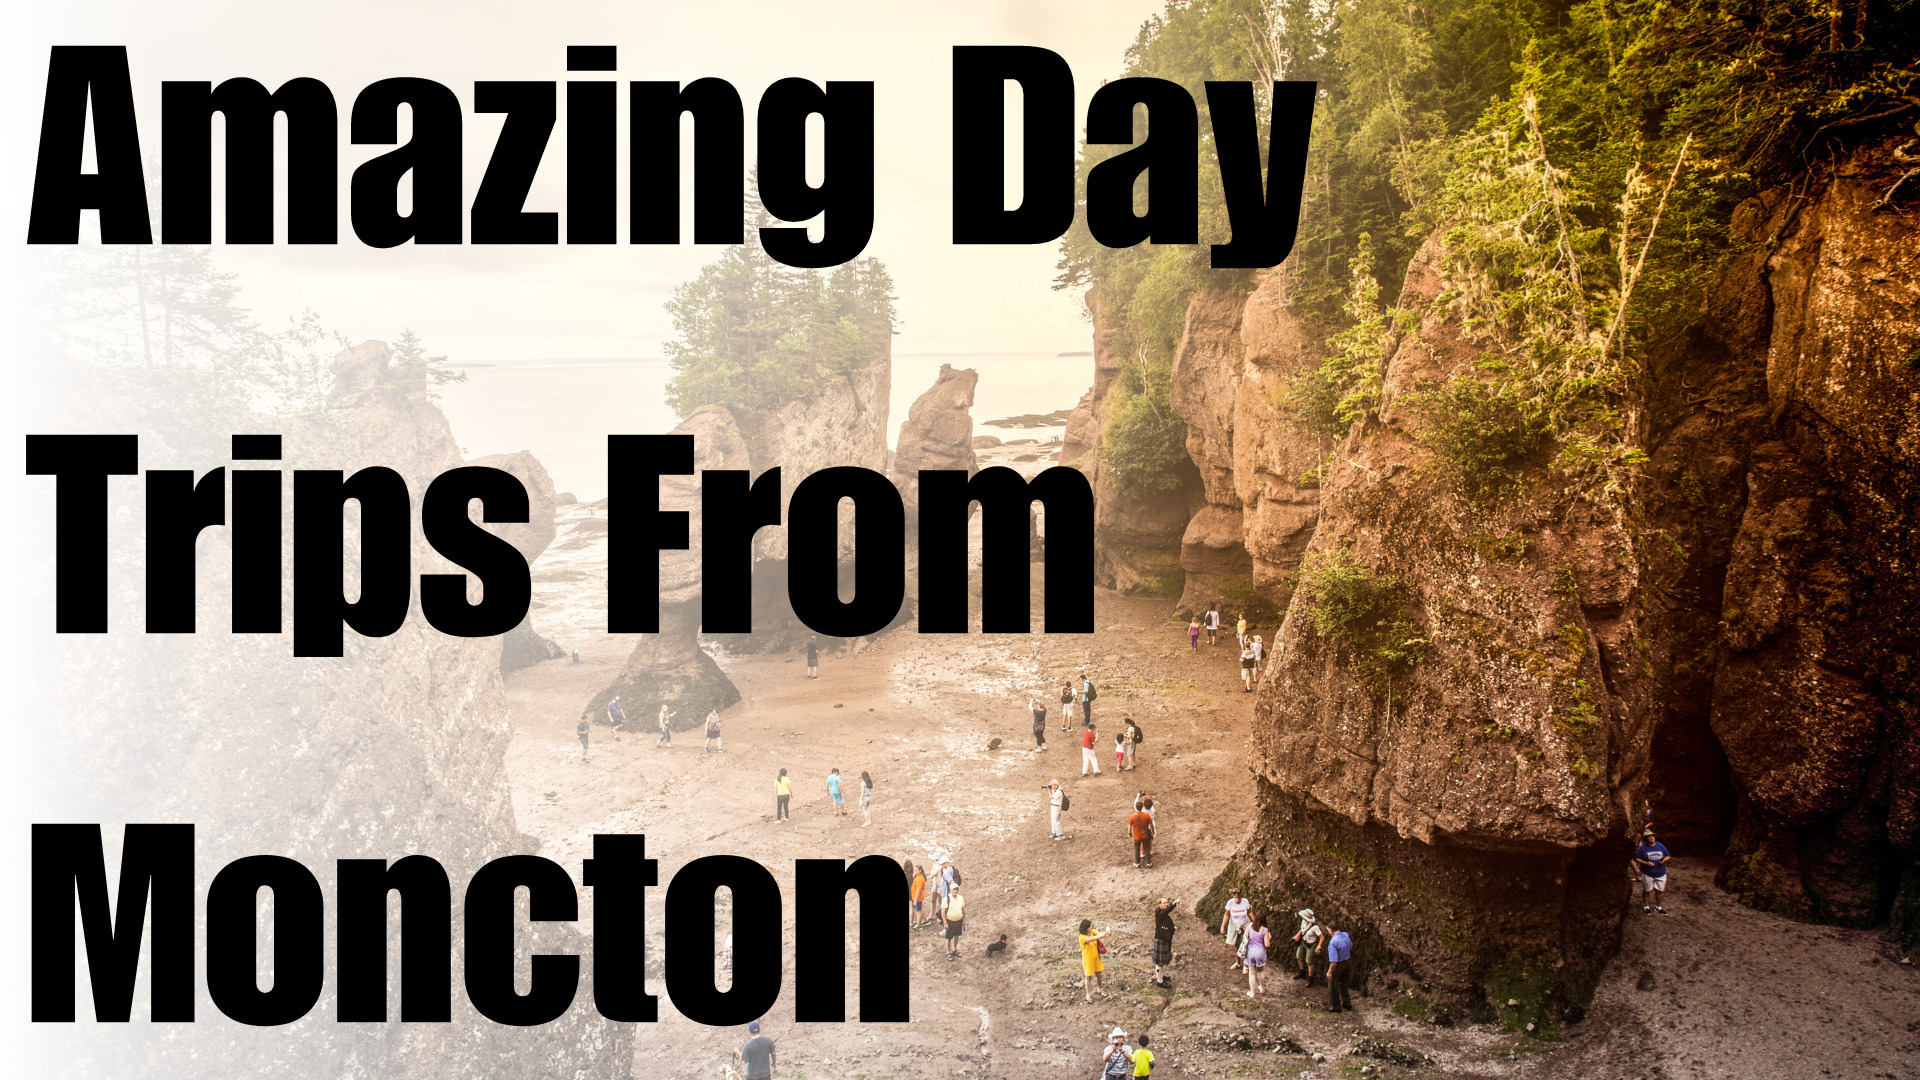 Amazing Day Trips from Moncton, NB